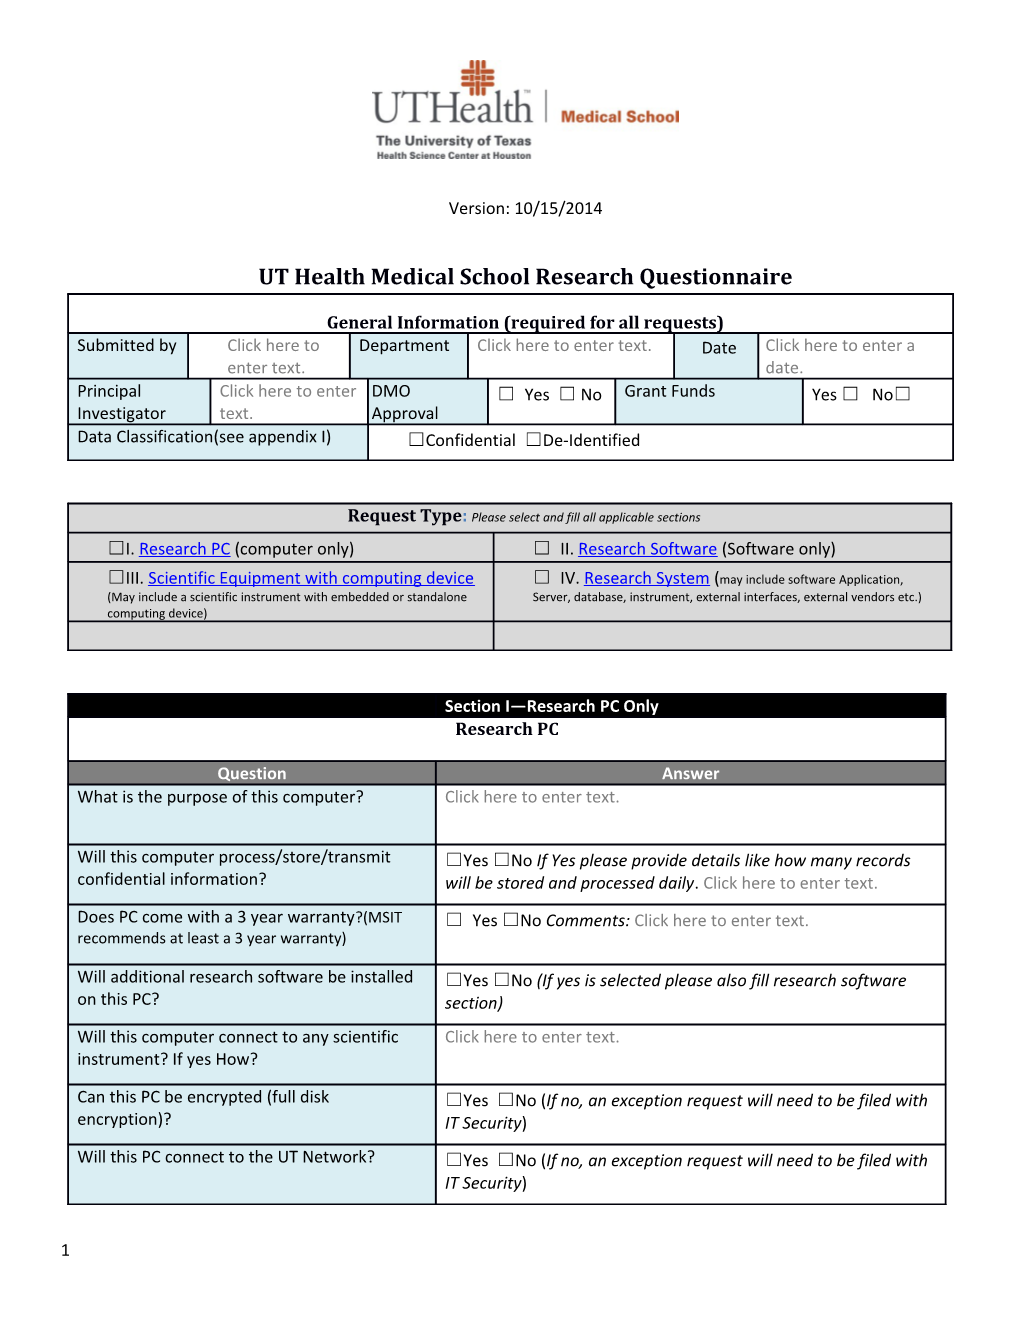 UT Health Medical School Research Questionnaire